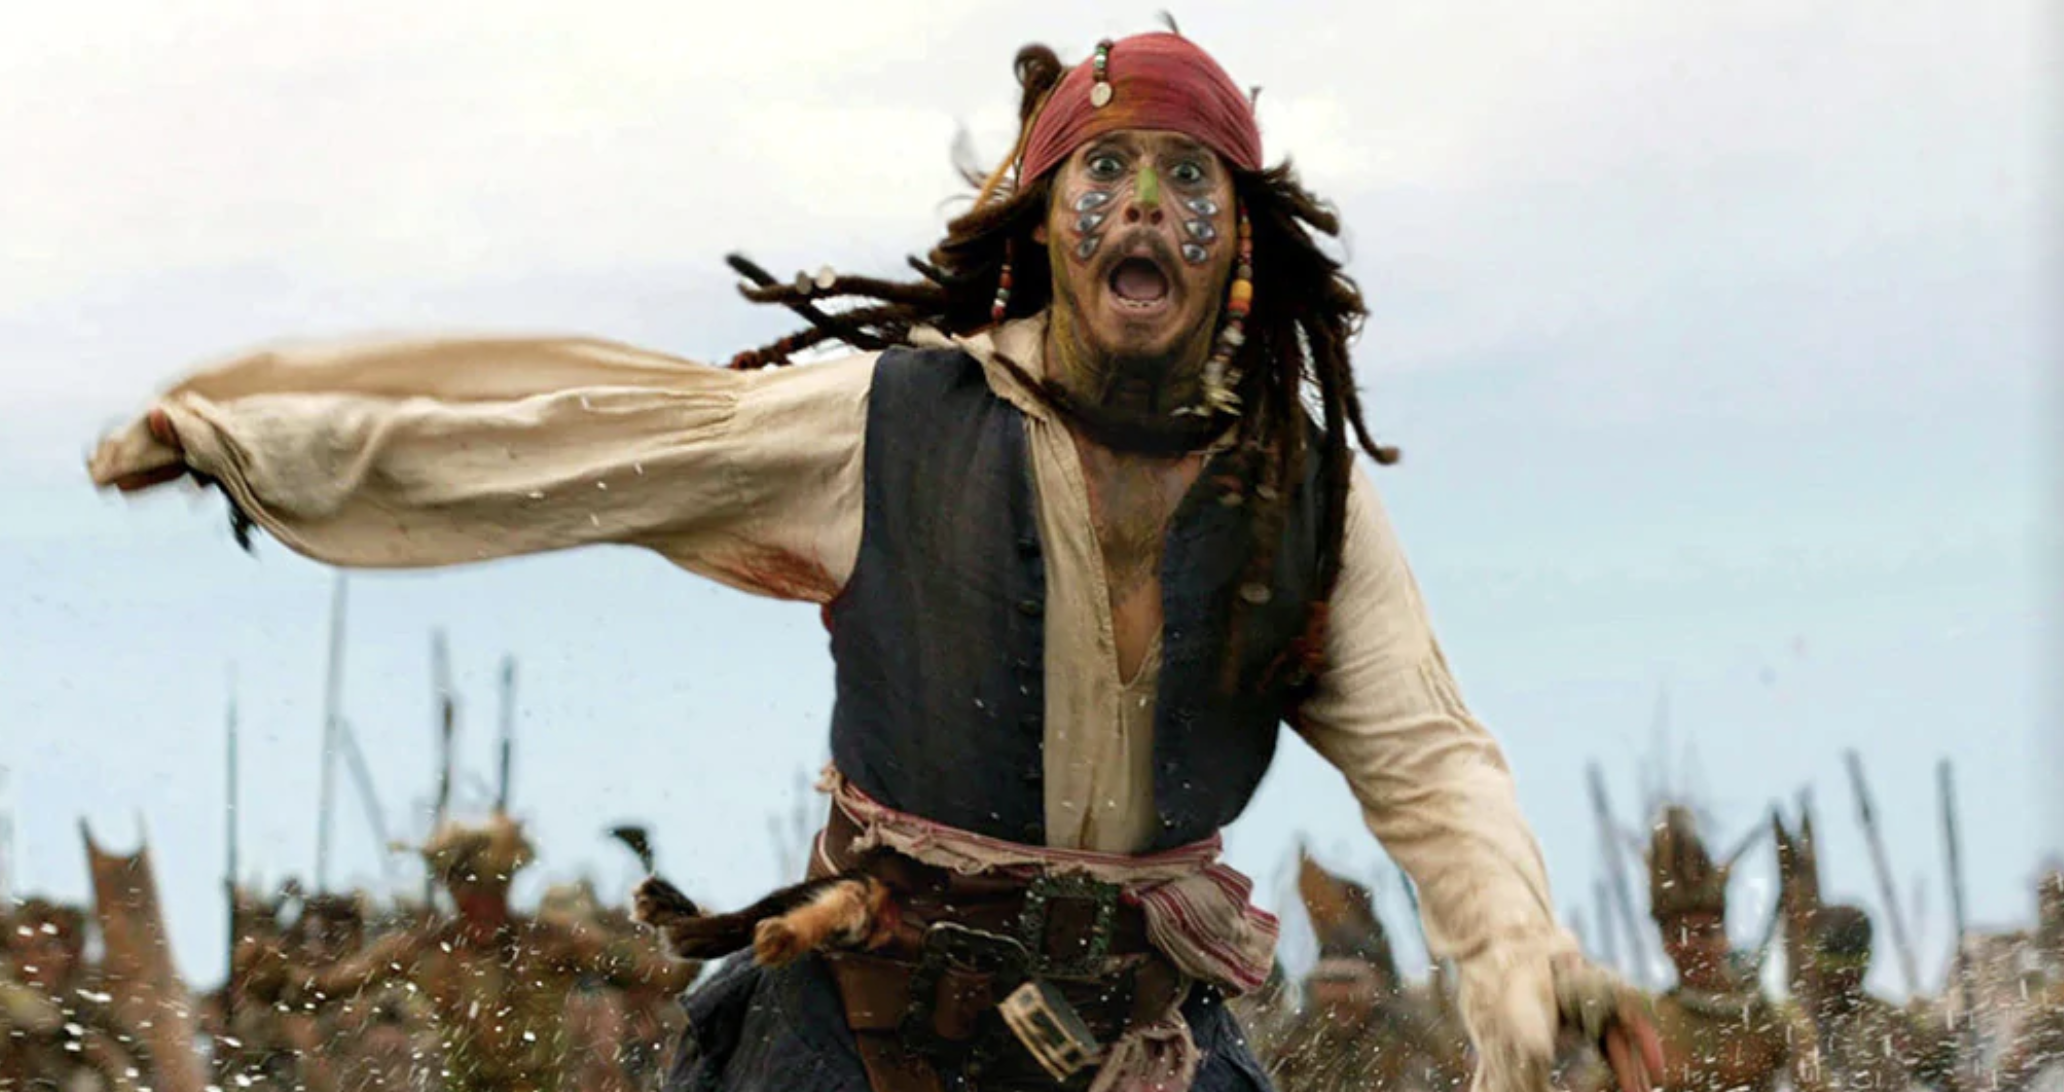 Johnny Depp as Captain Jack Sparrow in a “Pirates of the Caribbean” movie running toward the camera and yelling.